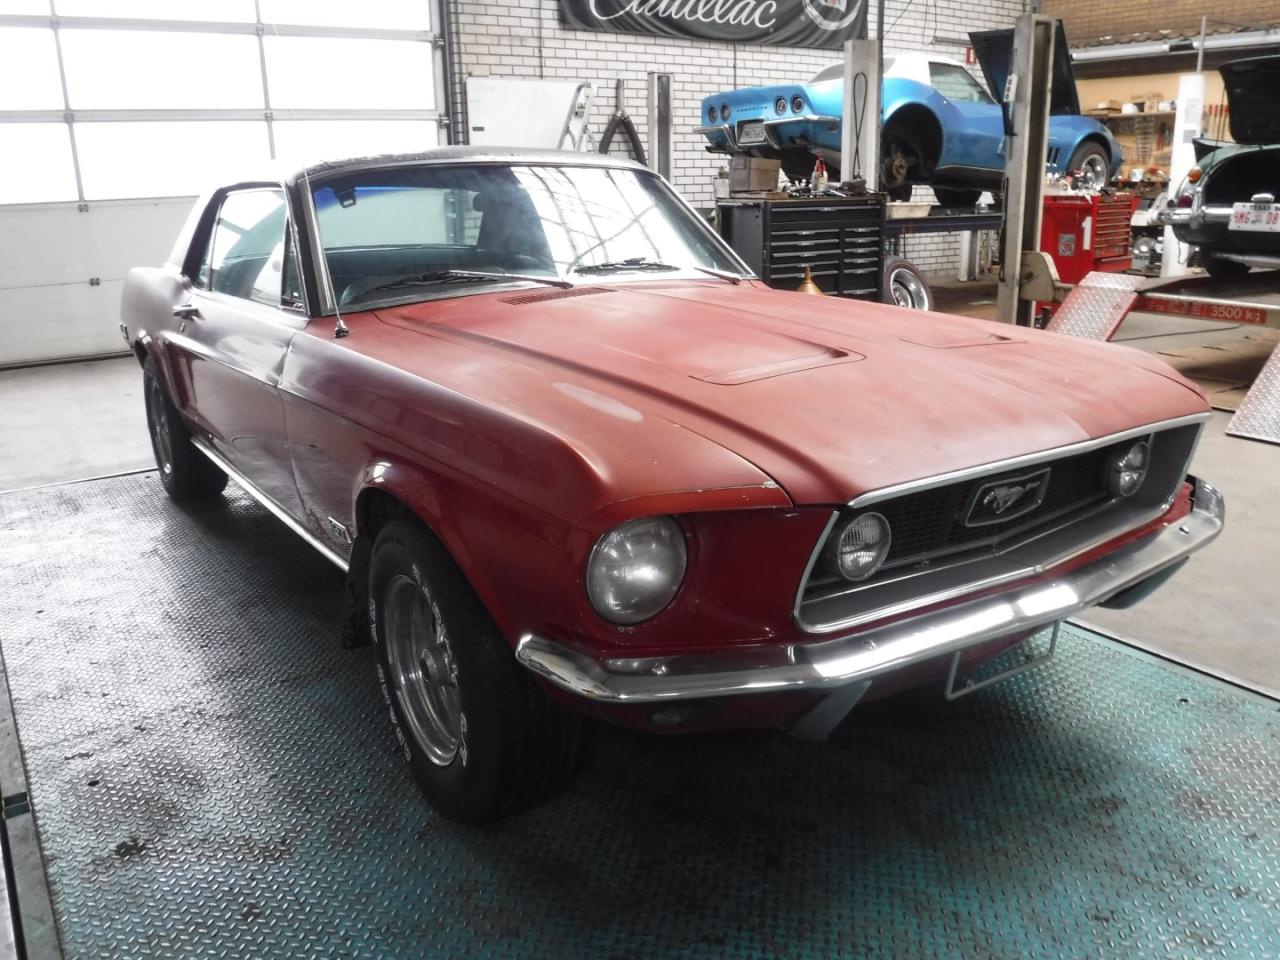 1968 Ford Mustang J code